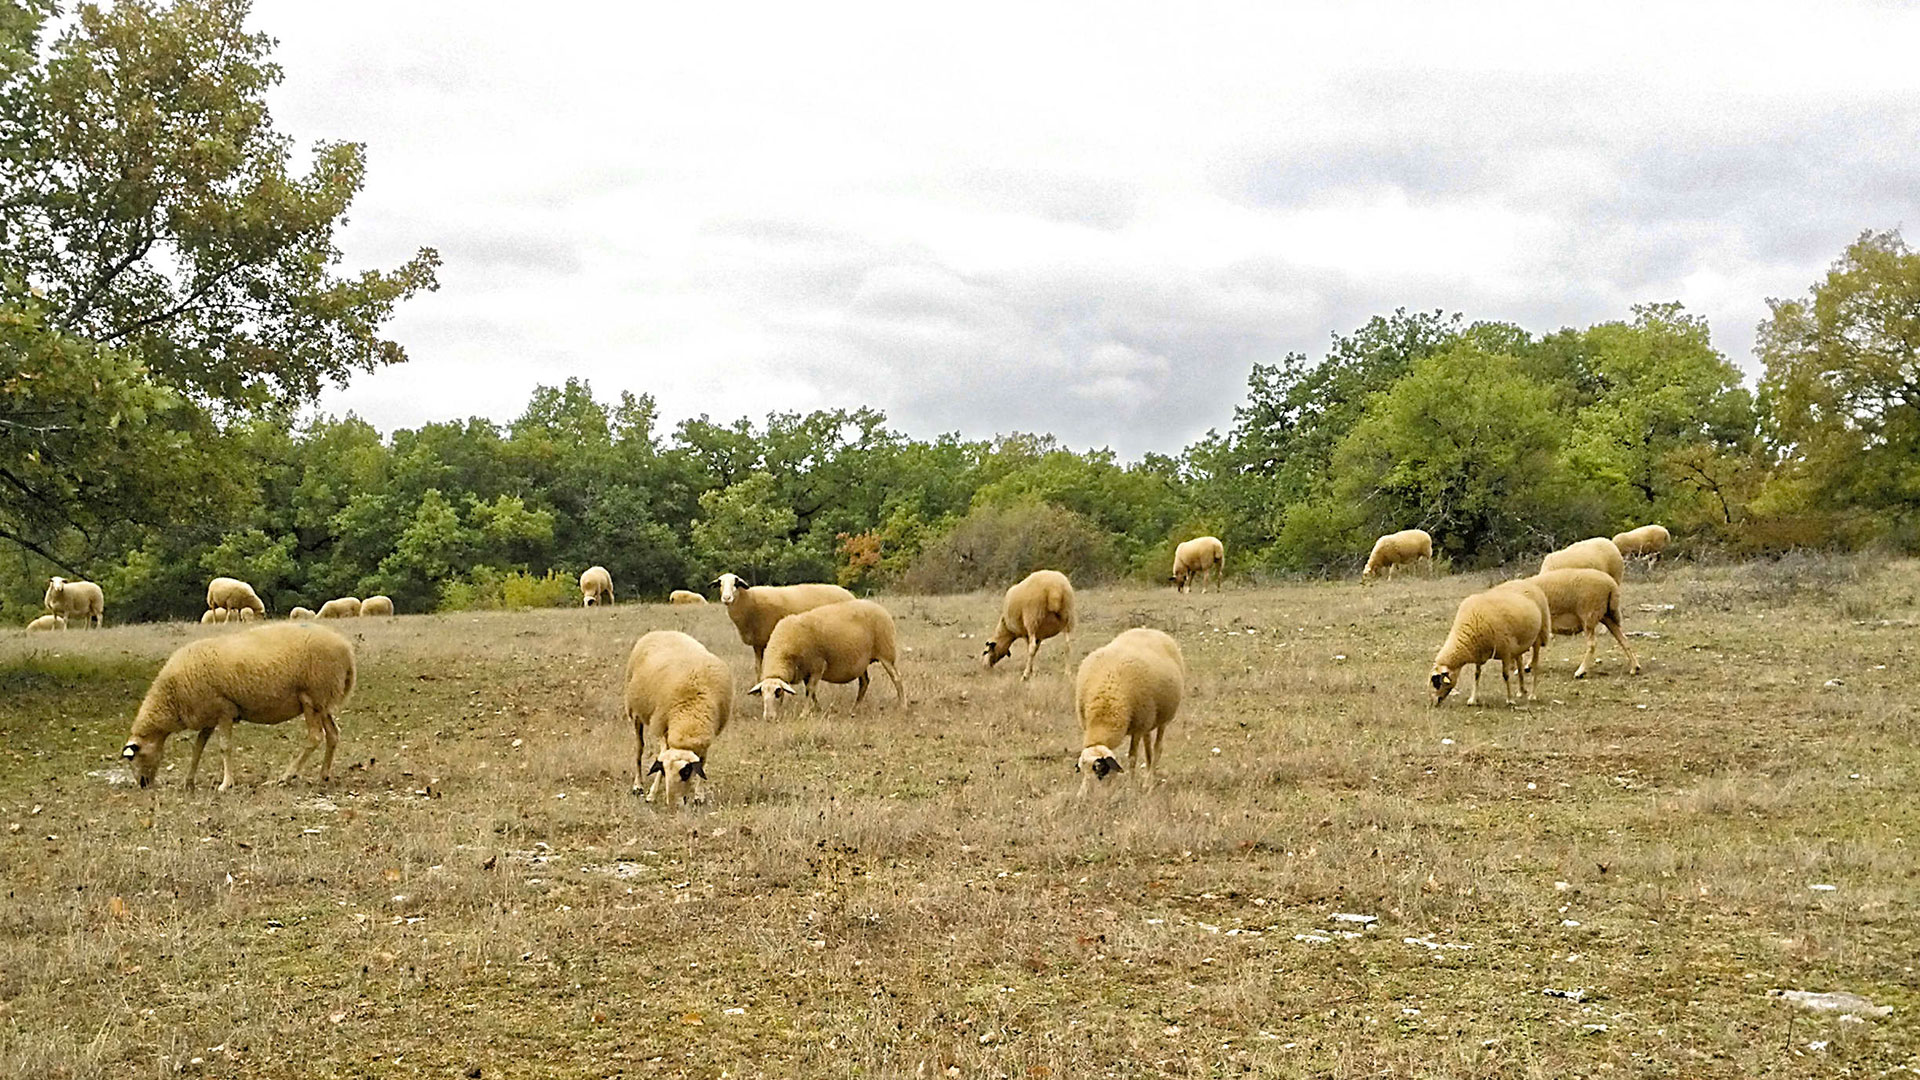 In the PNR Causses du Quercy, a herd of Caussenarde sheep, a local breed recognisable by its black glasses.